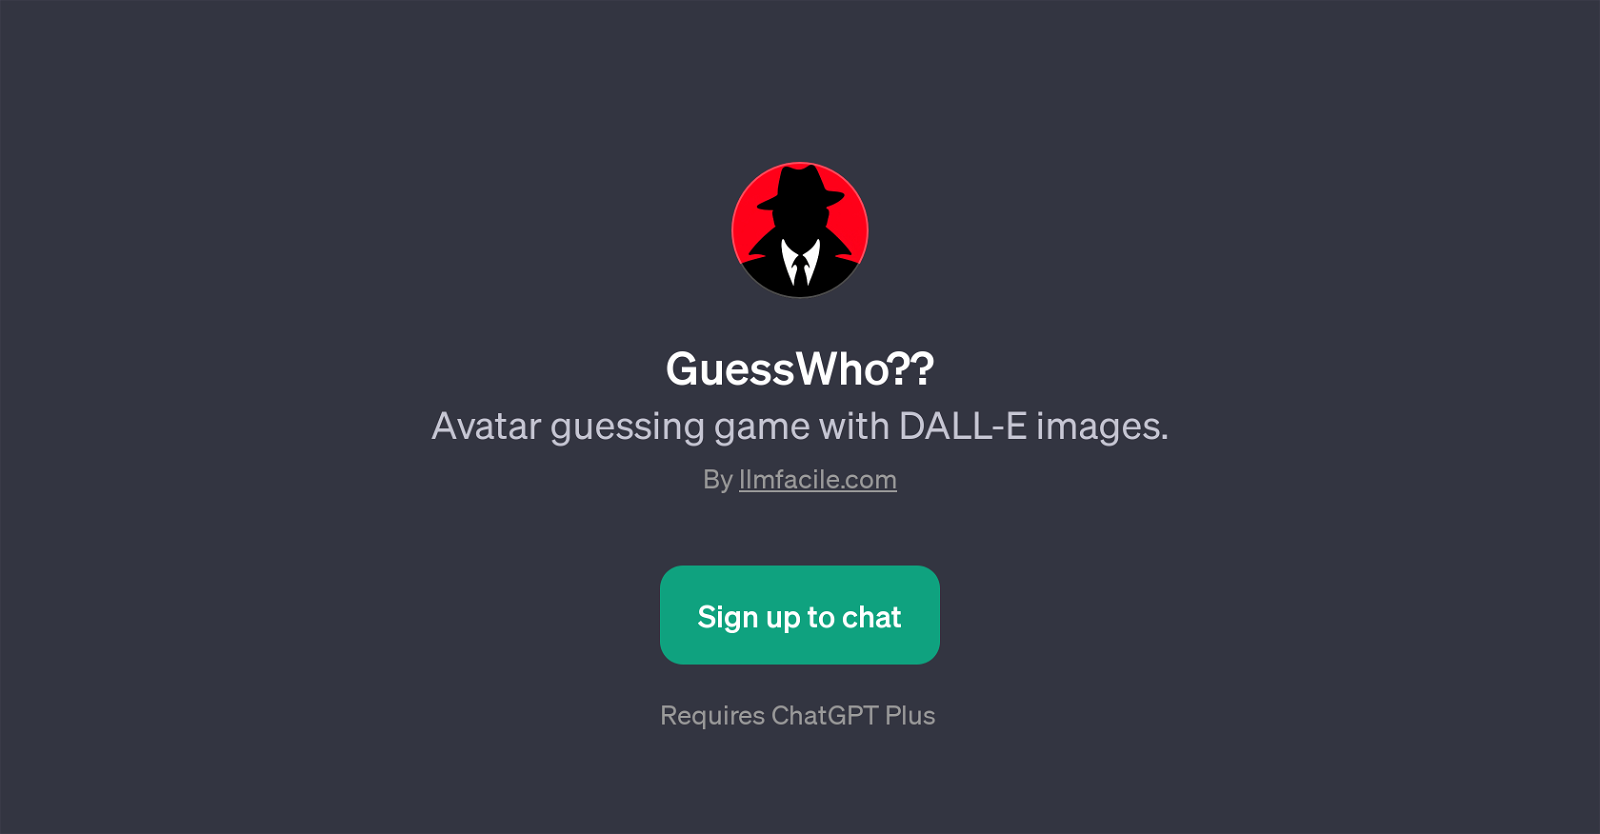 GuessWho?? website